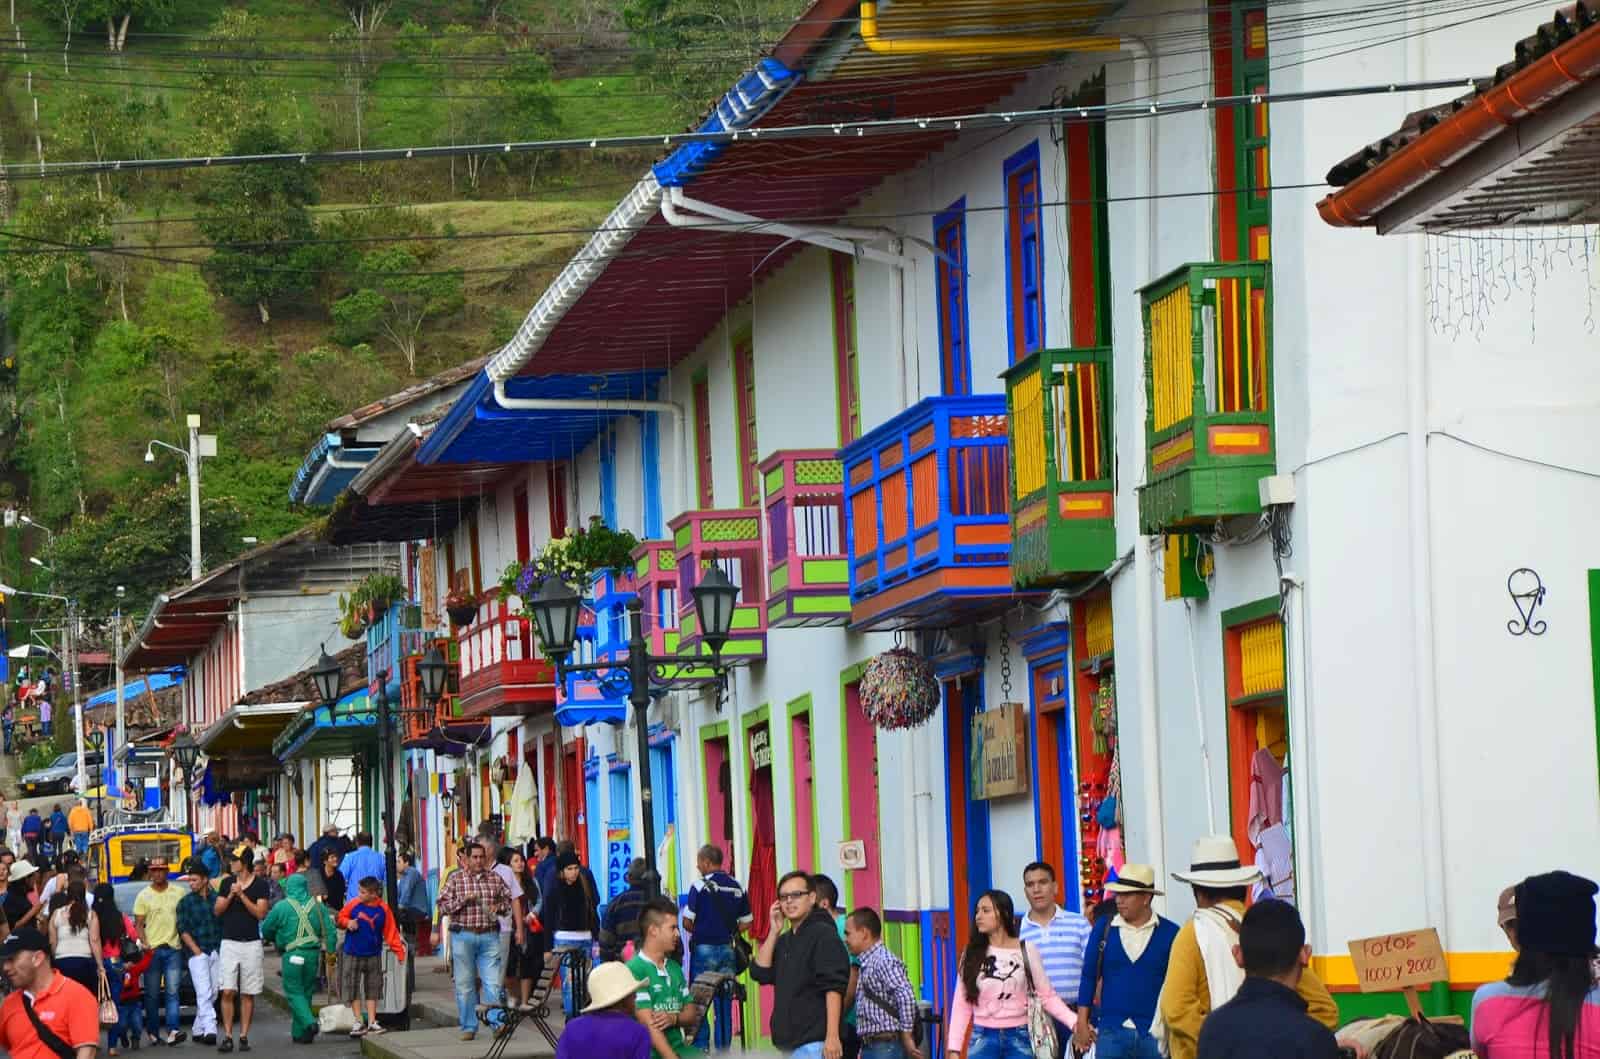 Colorful balconies on Calle Real in Salento, Quindío, Colombia